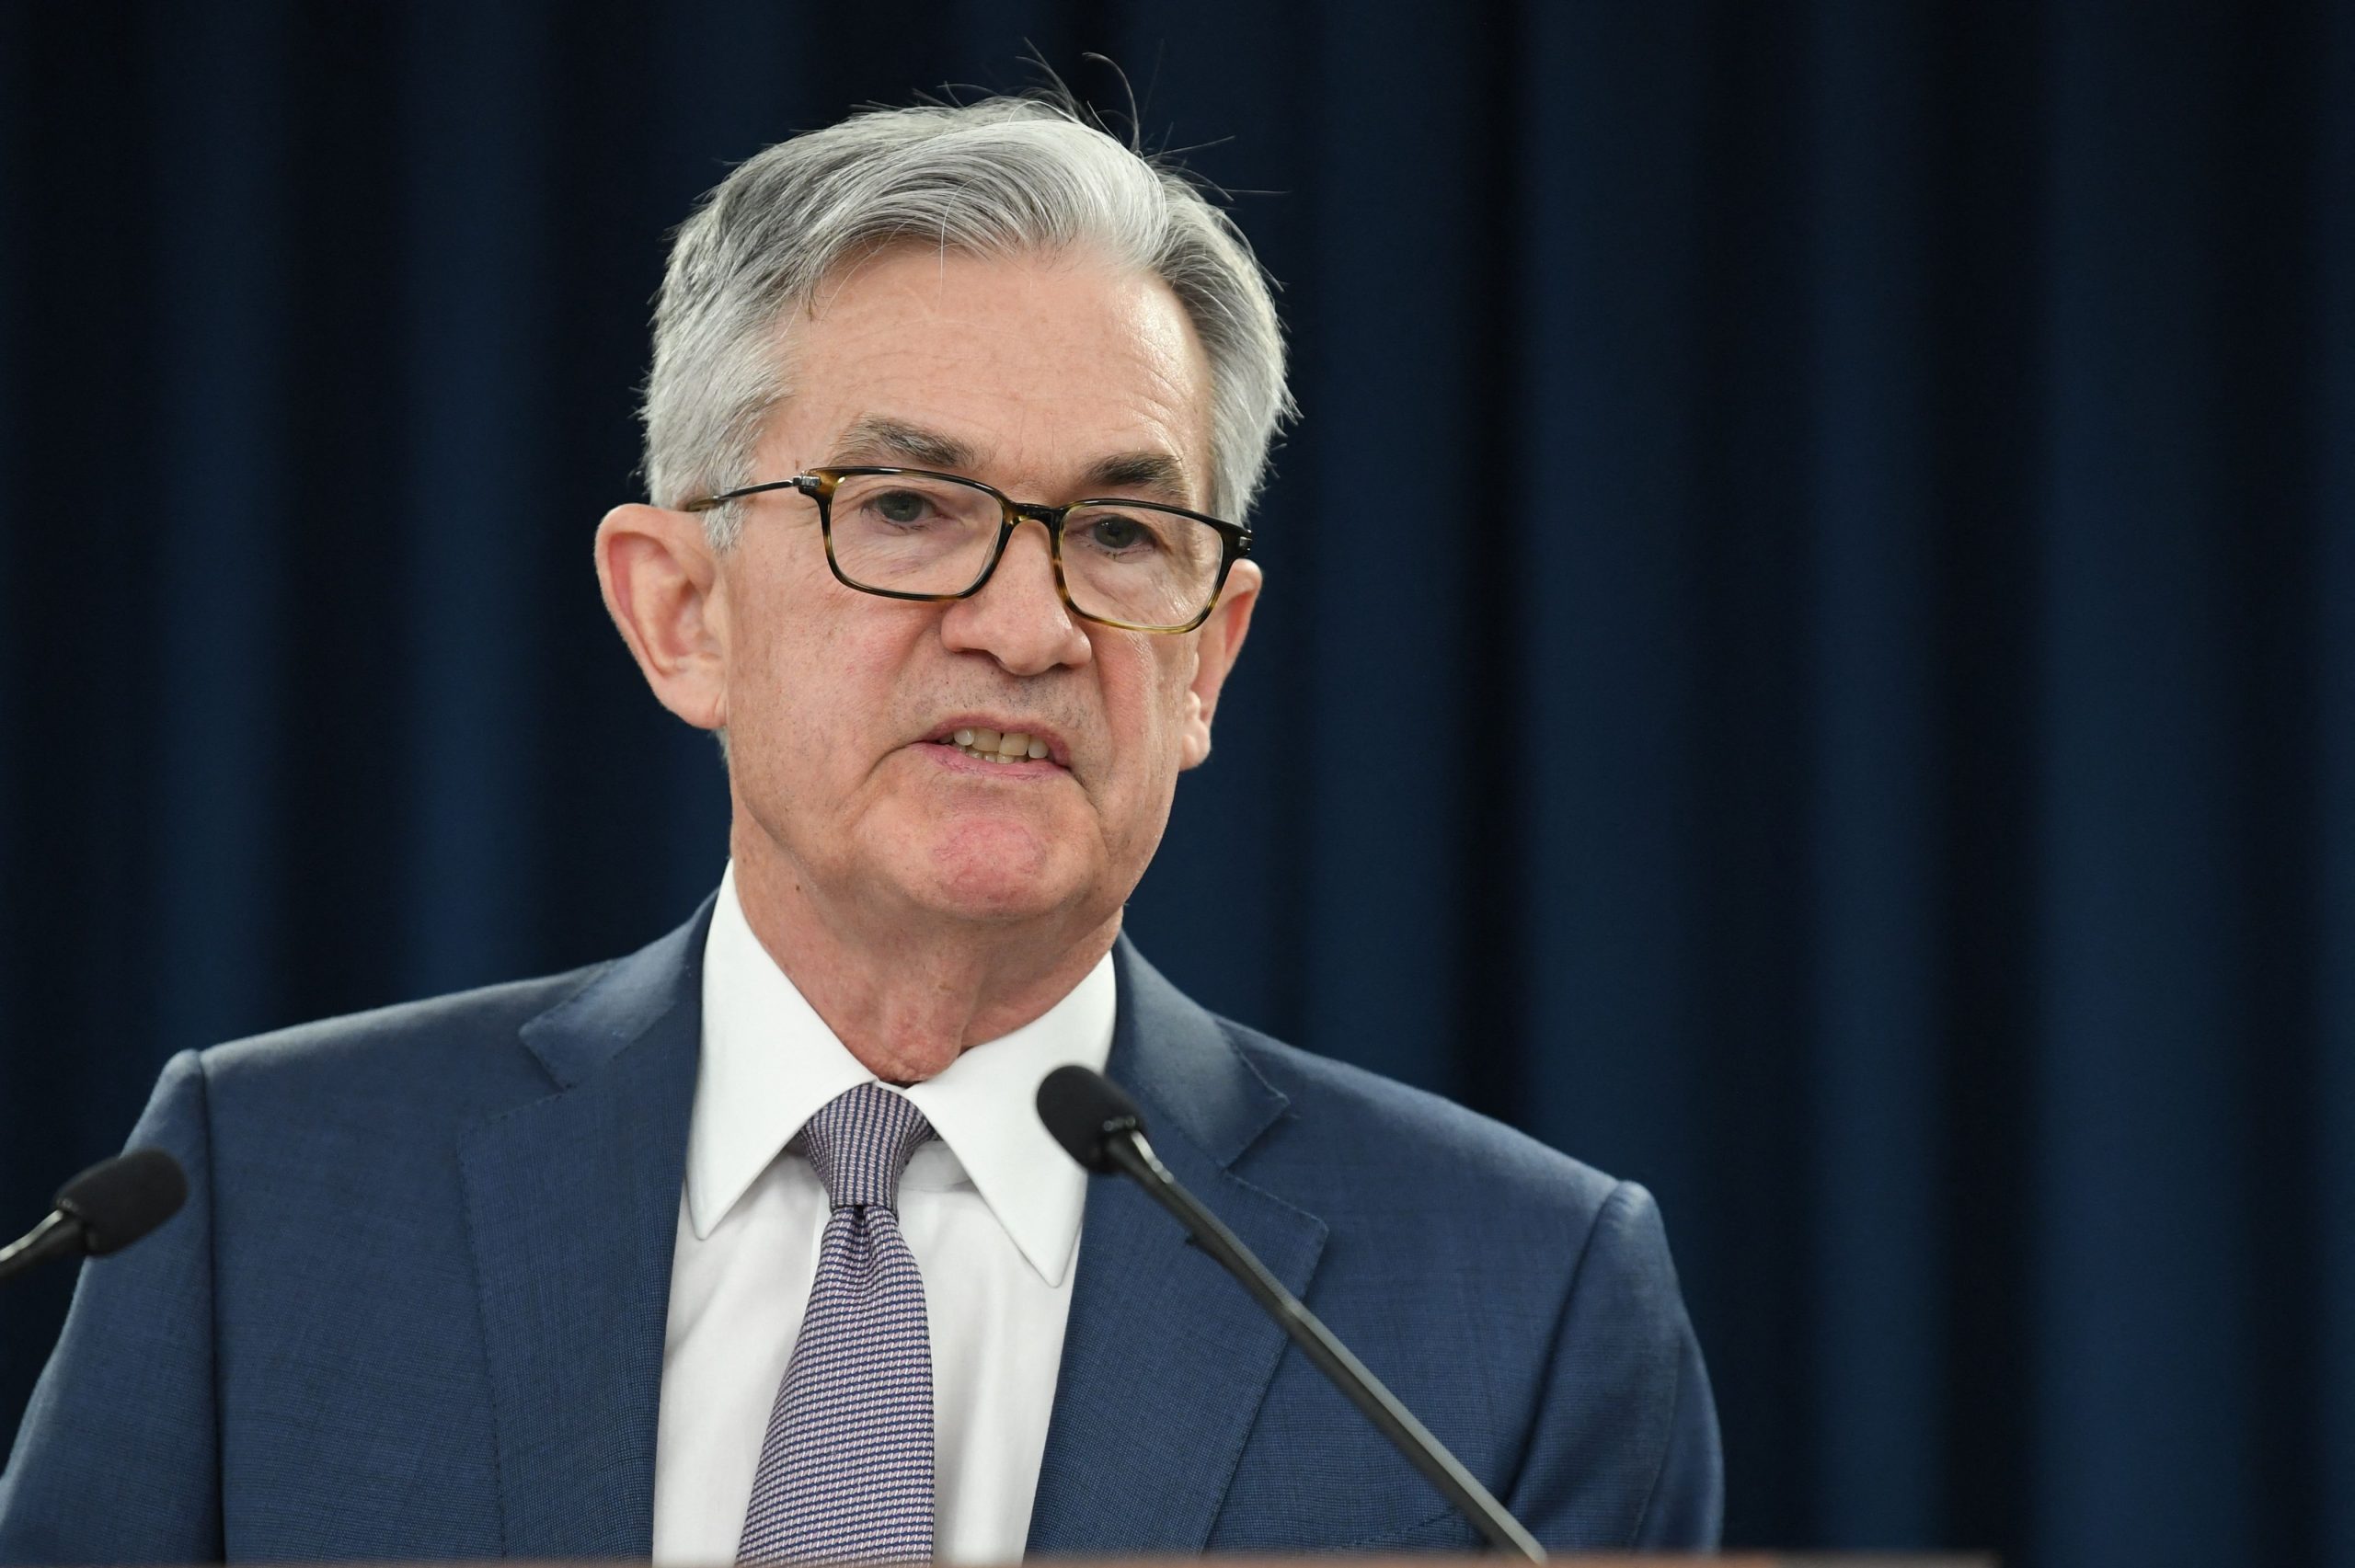 US Fed raises interest rate by 0.25% in its first rate hike to combat inflation